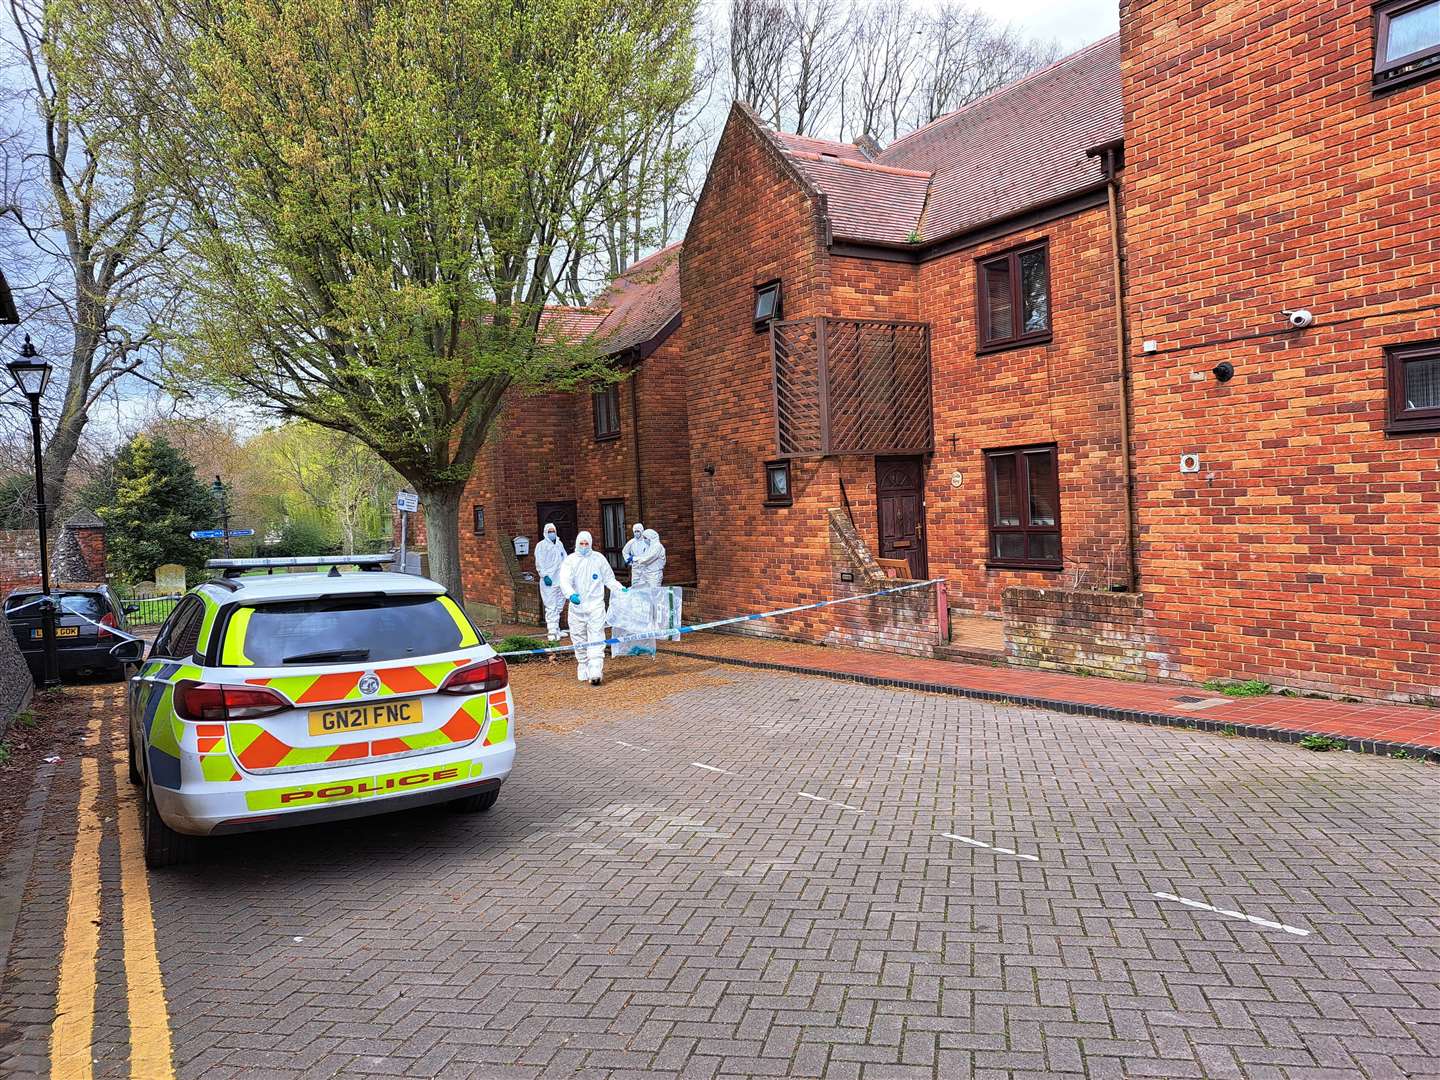 A 27-year-old man has been arrested on suspicion of murder